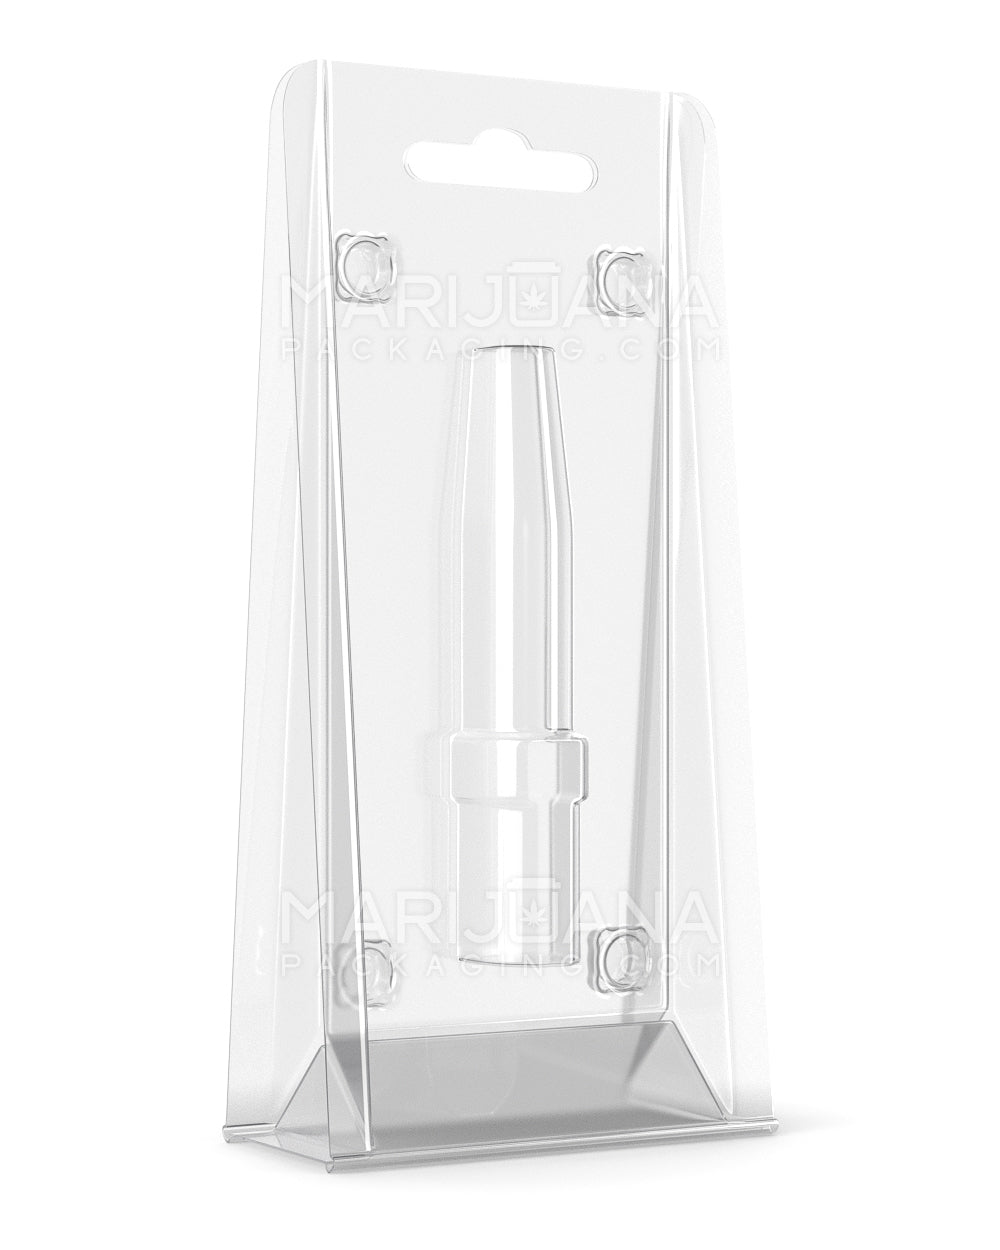 Trifold Blister Packaging for Syringes | 0.5mL/1mL- No Insert - 500 Count - 1